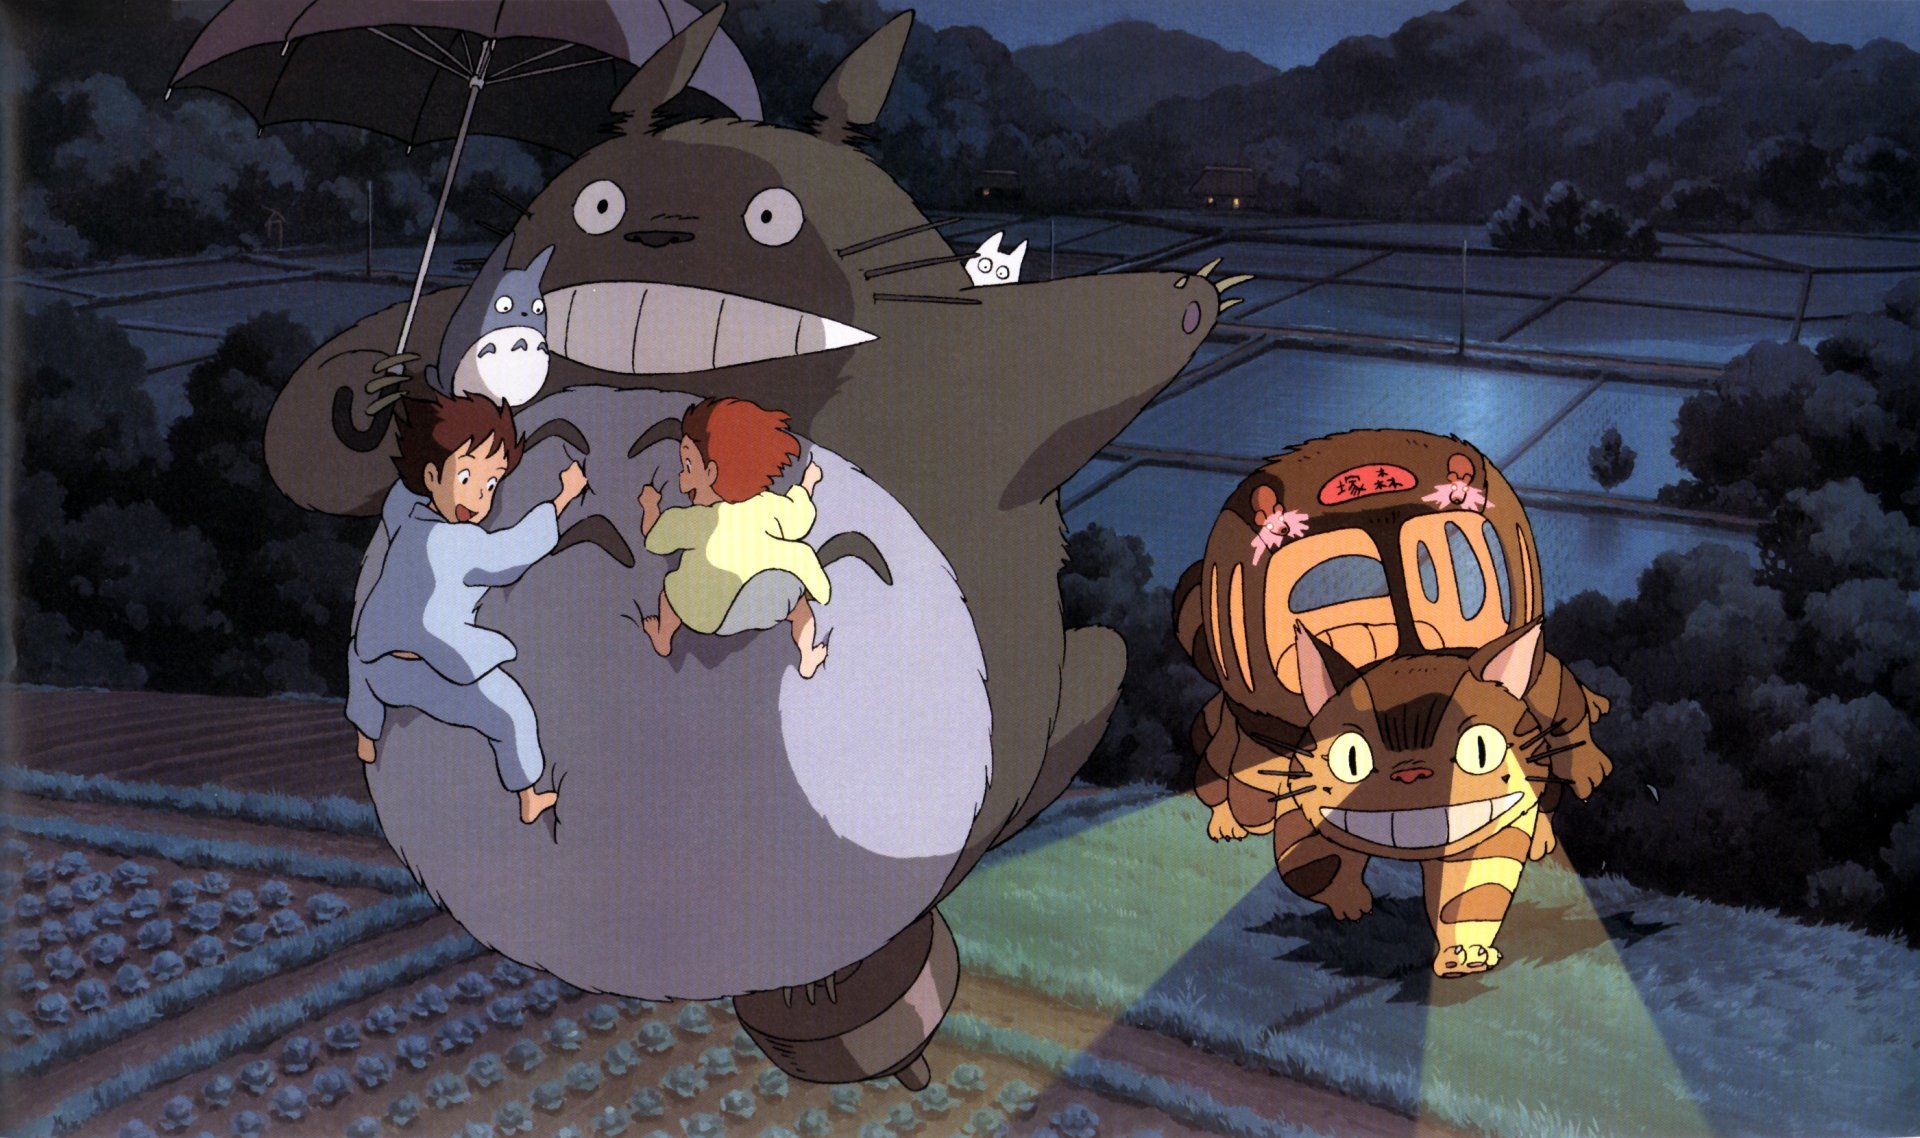 A still from My Neighbor Totoro, featuring two young girls and a boy sitting on the back of a giant cat-like creature. - My Neighbor Totoro